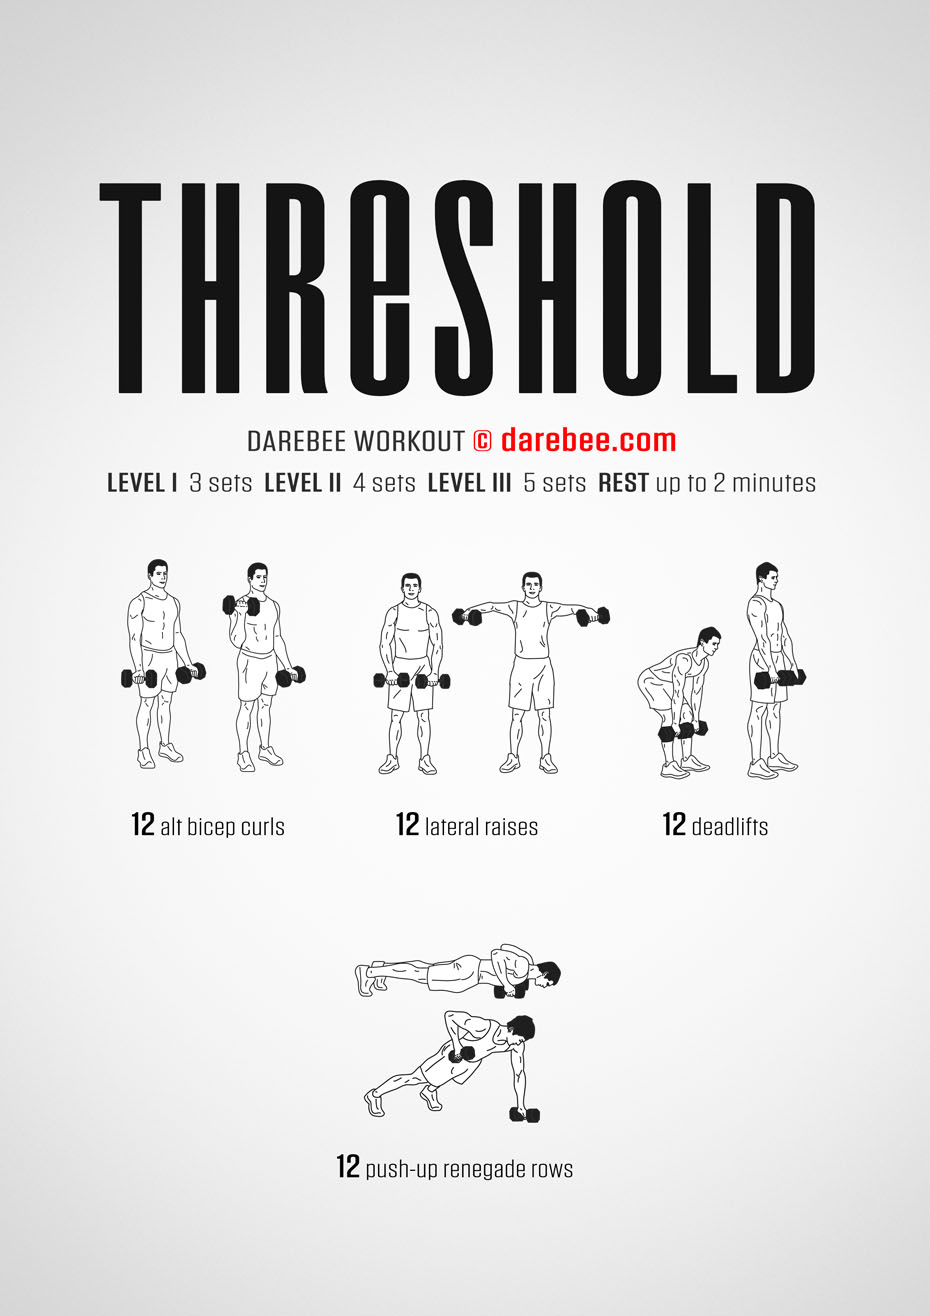 Threshold is a Darebee home-fitness strength and muscle building workout.